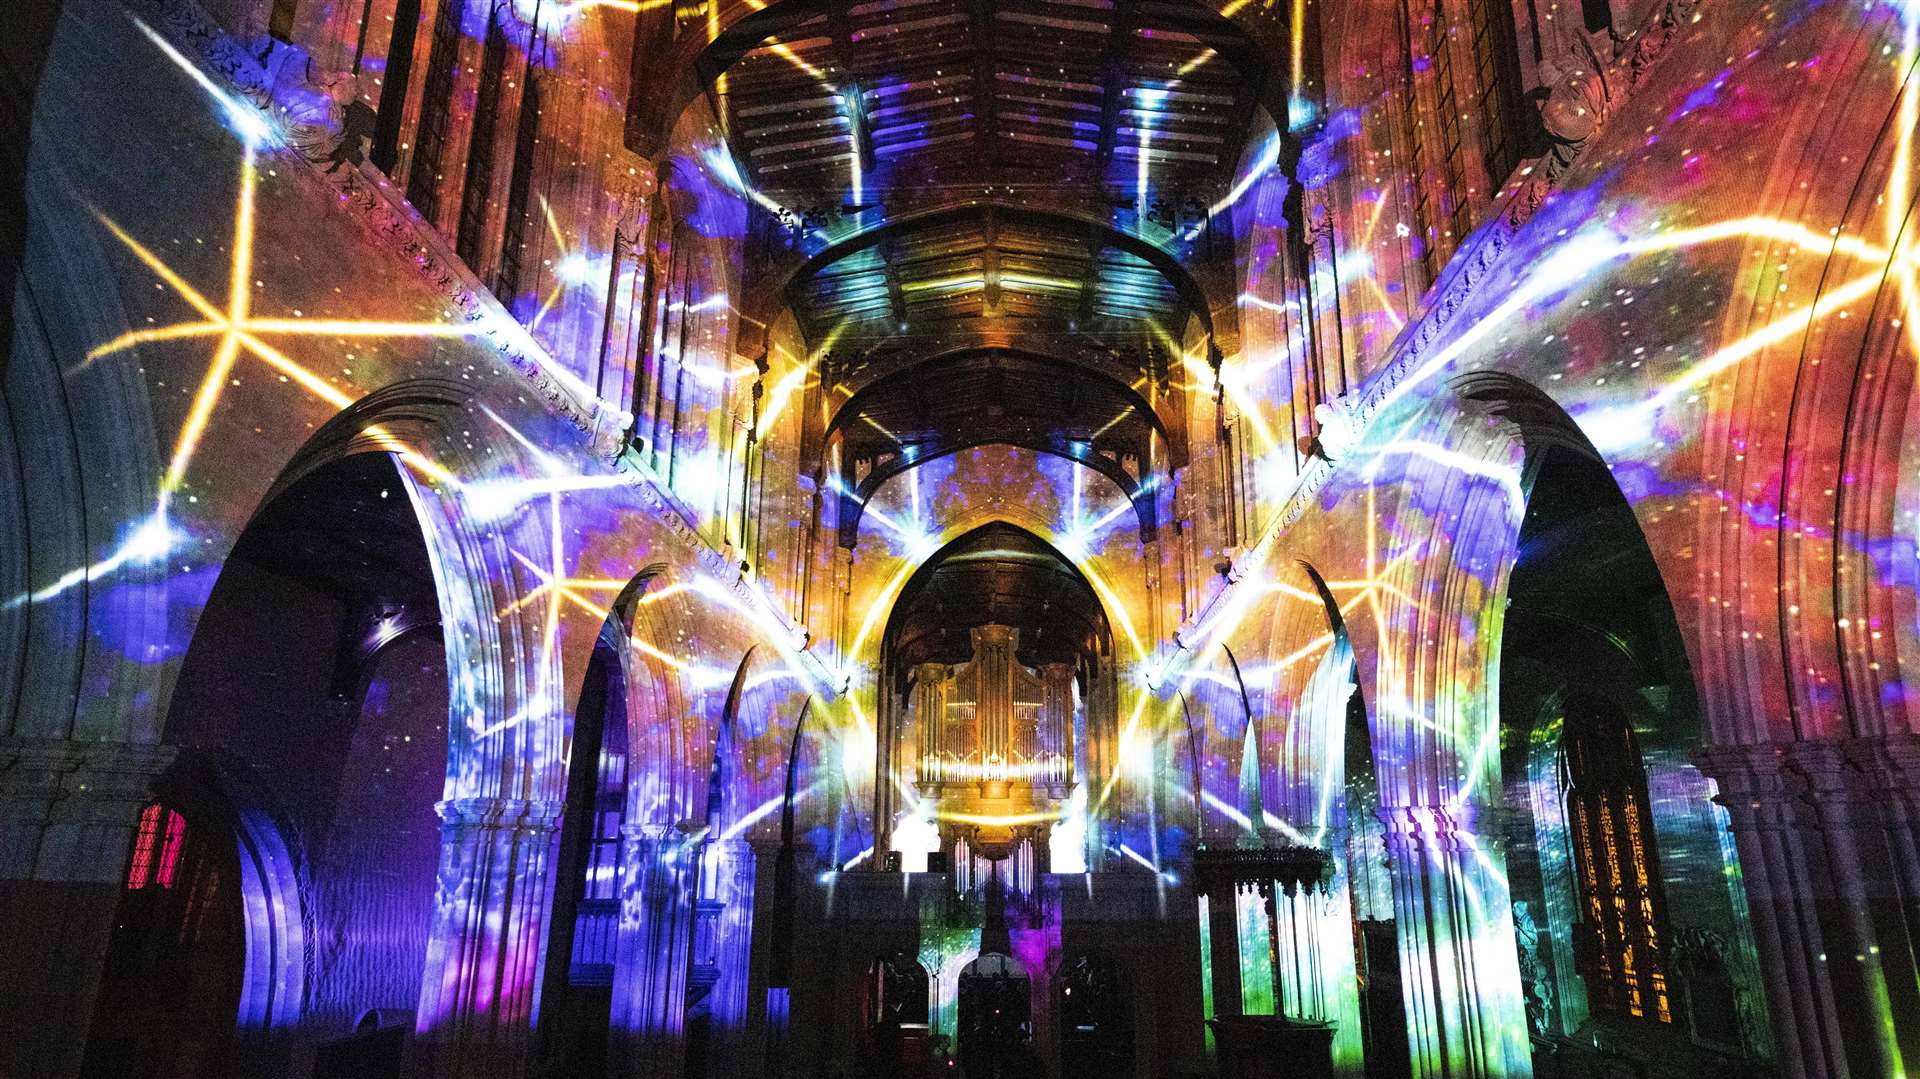 Space Voyage is coming to Rochester Cathedral